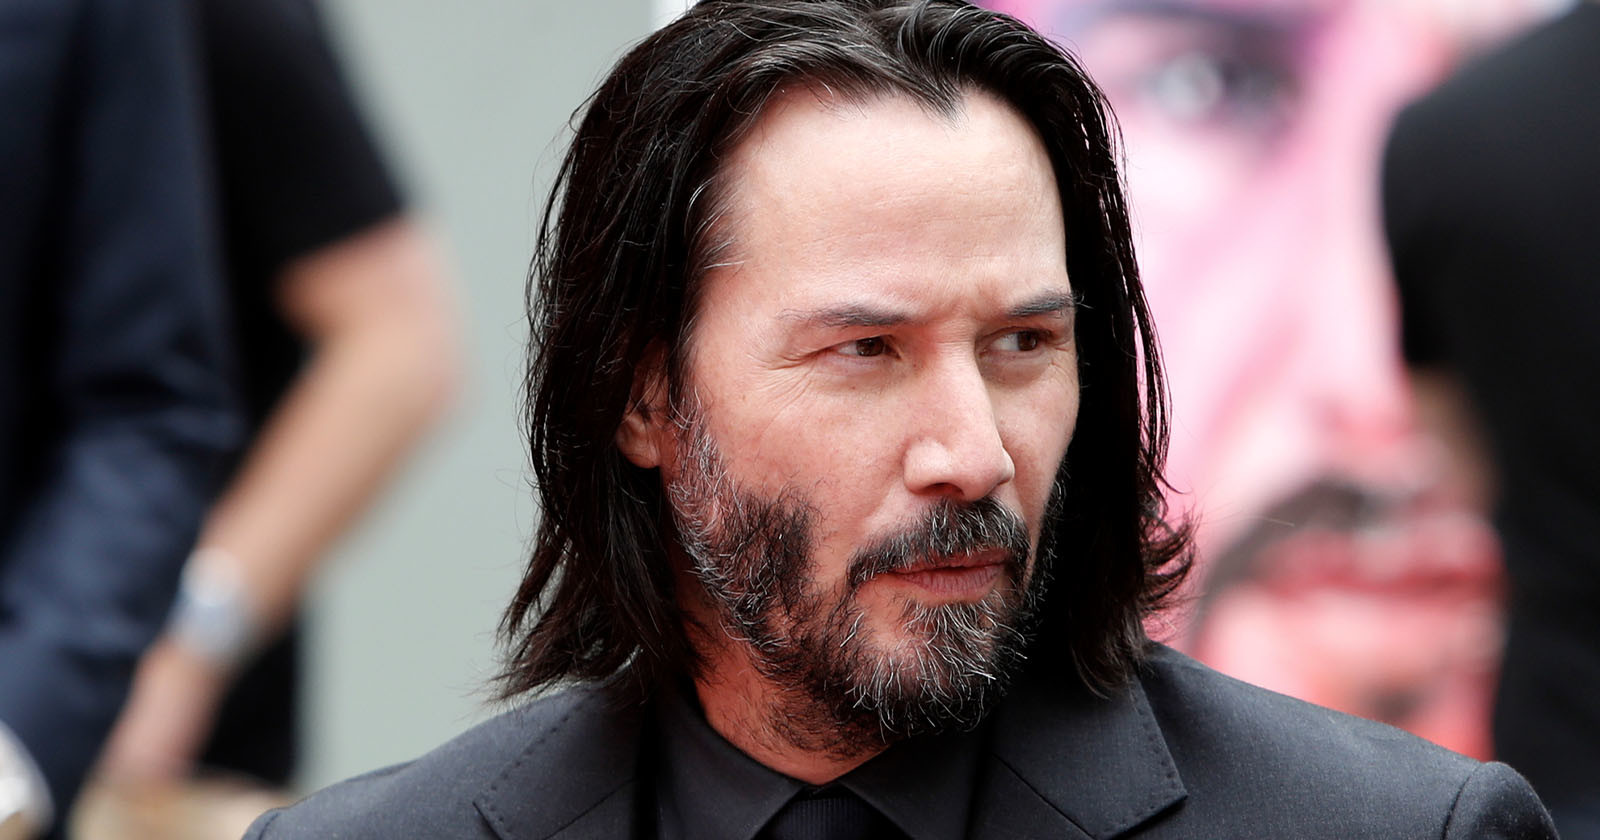 Keanu Reevess Film Contract Bans AI and Deepfake Technology